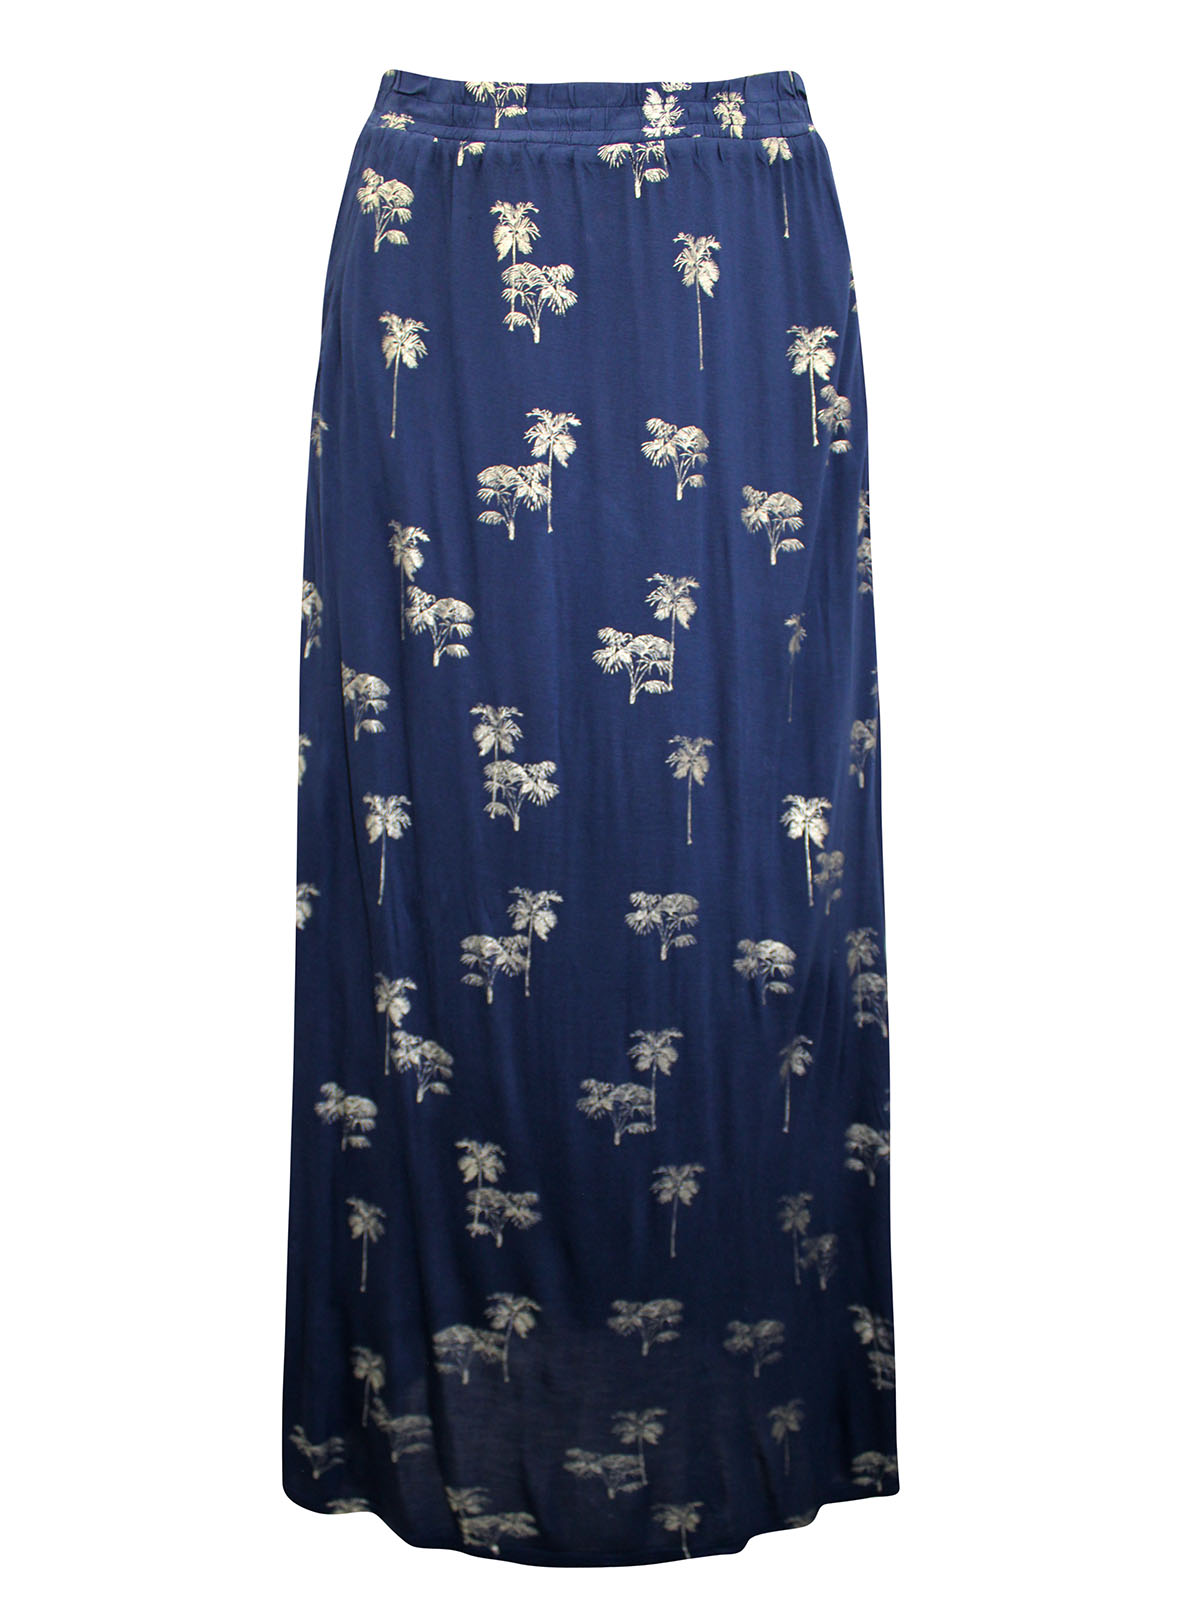 FAT FACE - - FF NAVY Selena Foil Palm Pull On Jersey Maxi Skirt - Size ...